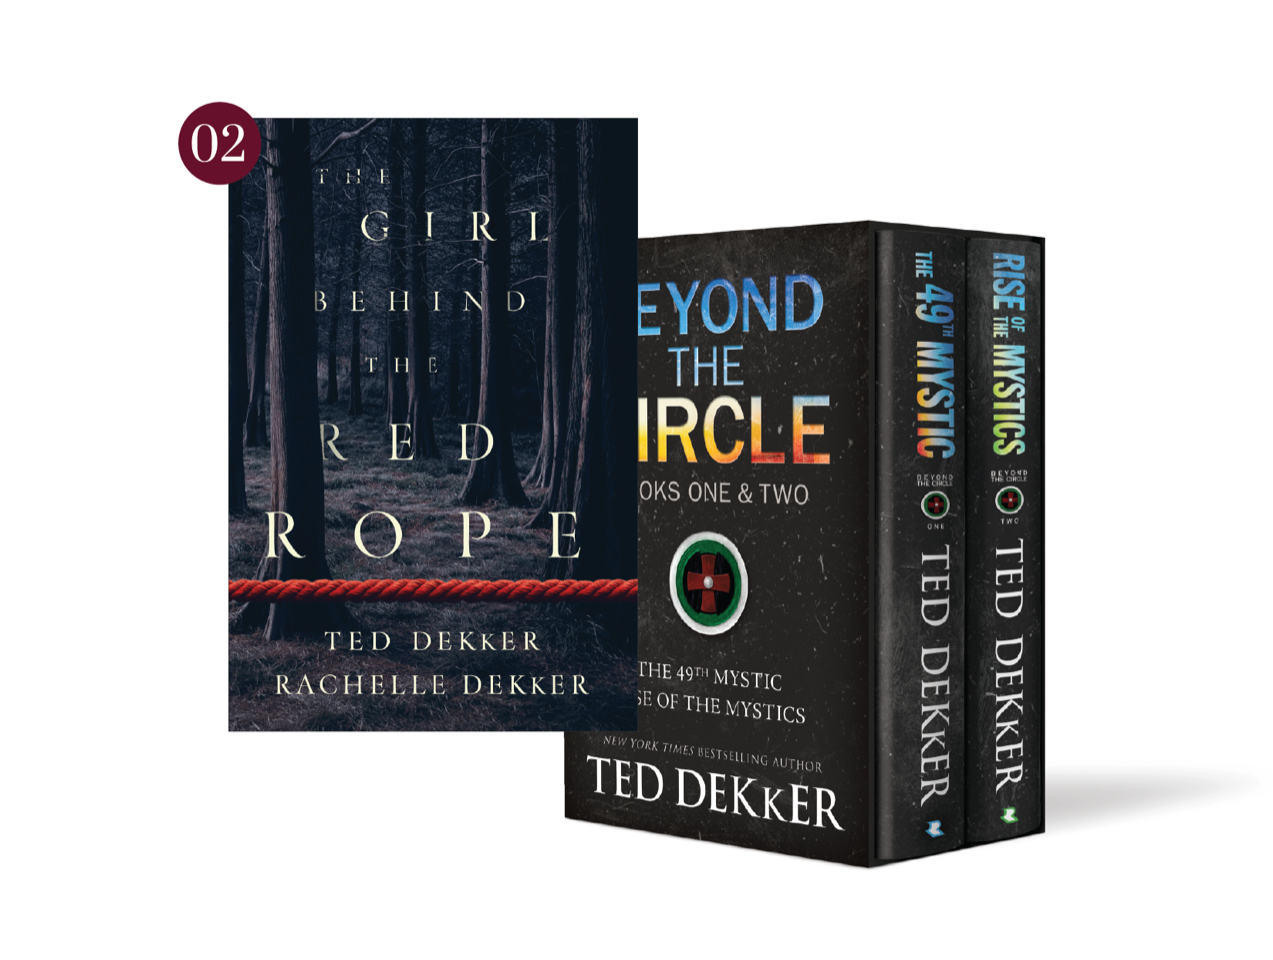 Ted Dekker (The Girl Behind the Red Rope) and Beyond the Circle Boxed Set